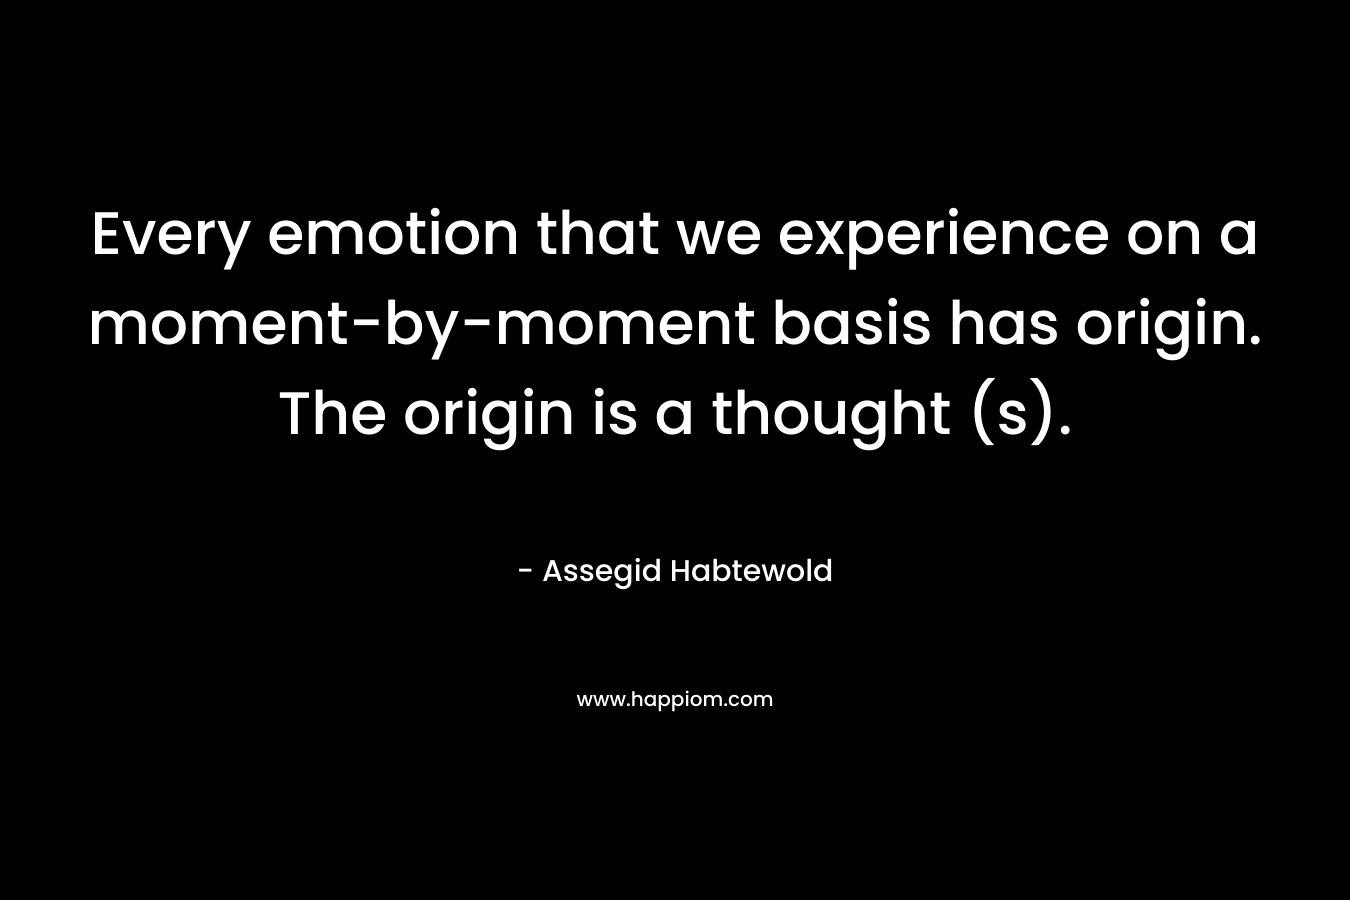 Every emotion that we experience on a moment-by-moment basis has origin. The origin is a thought (s).